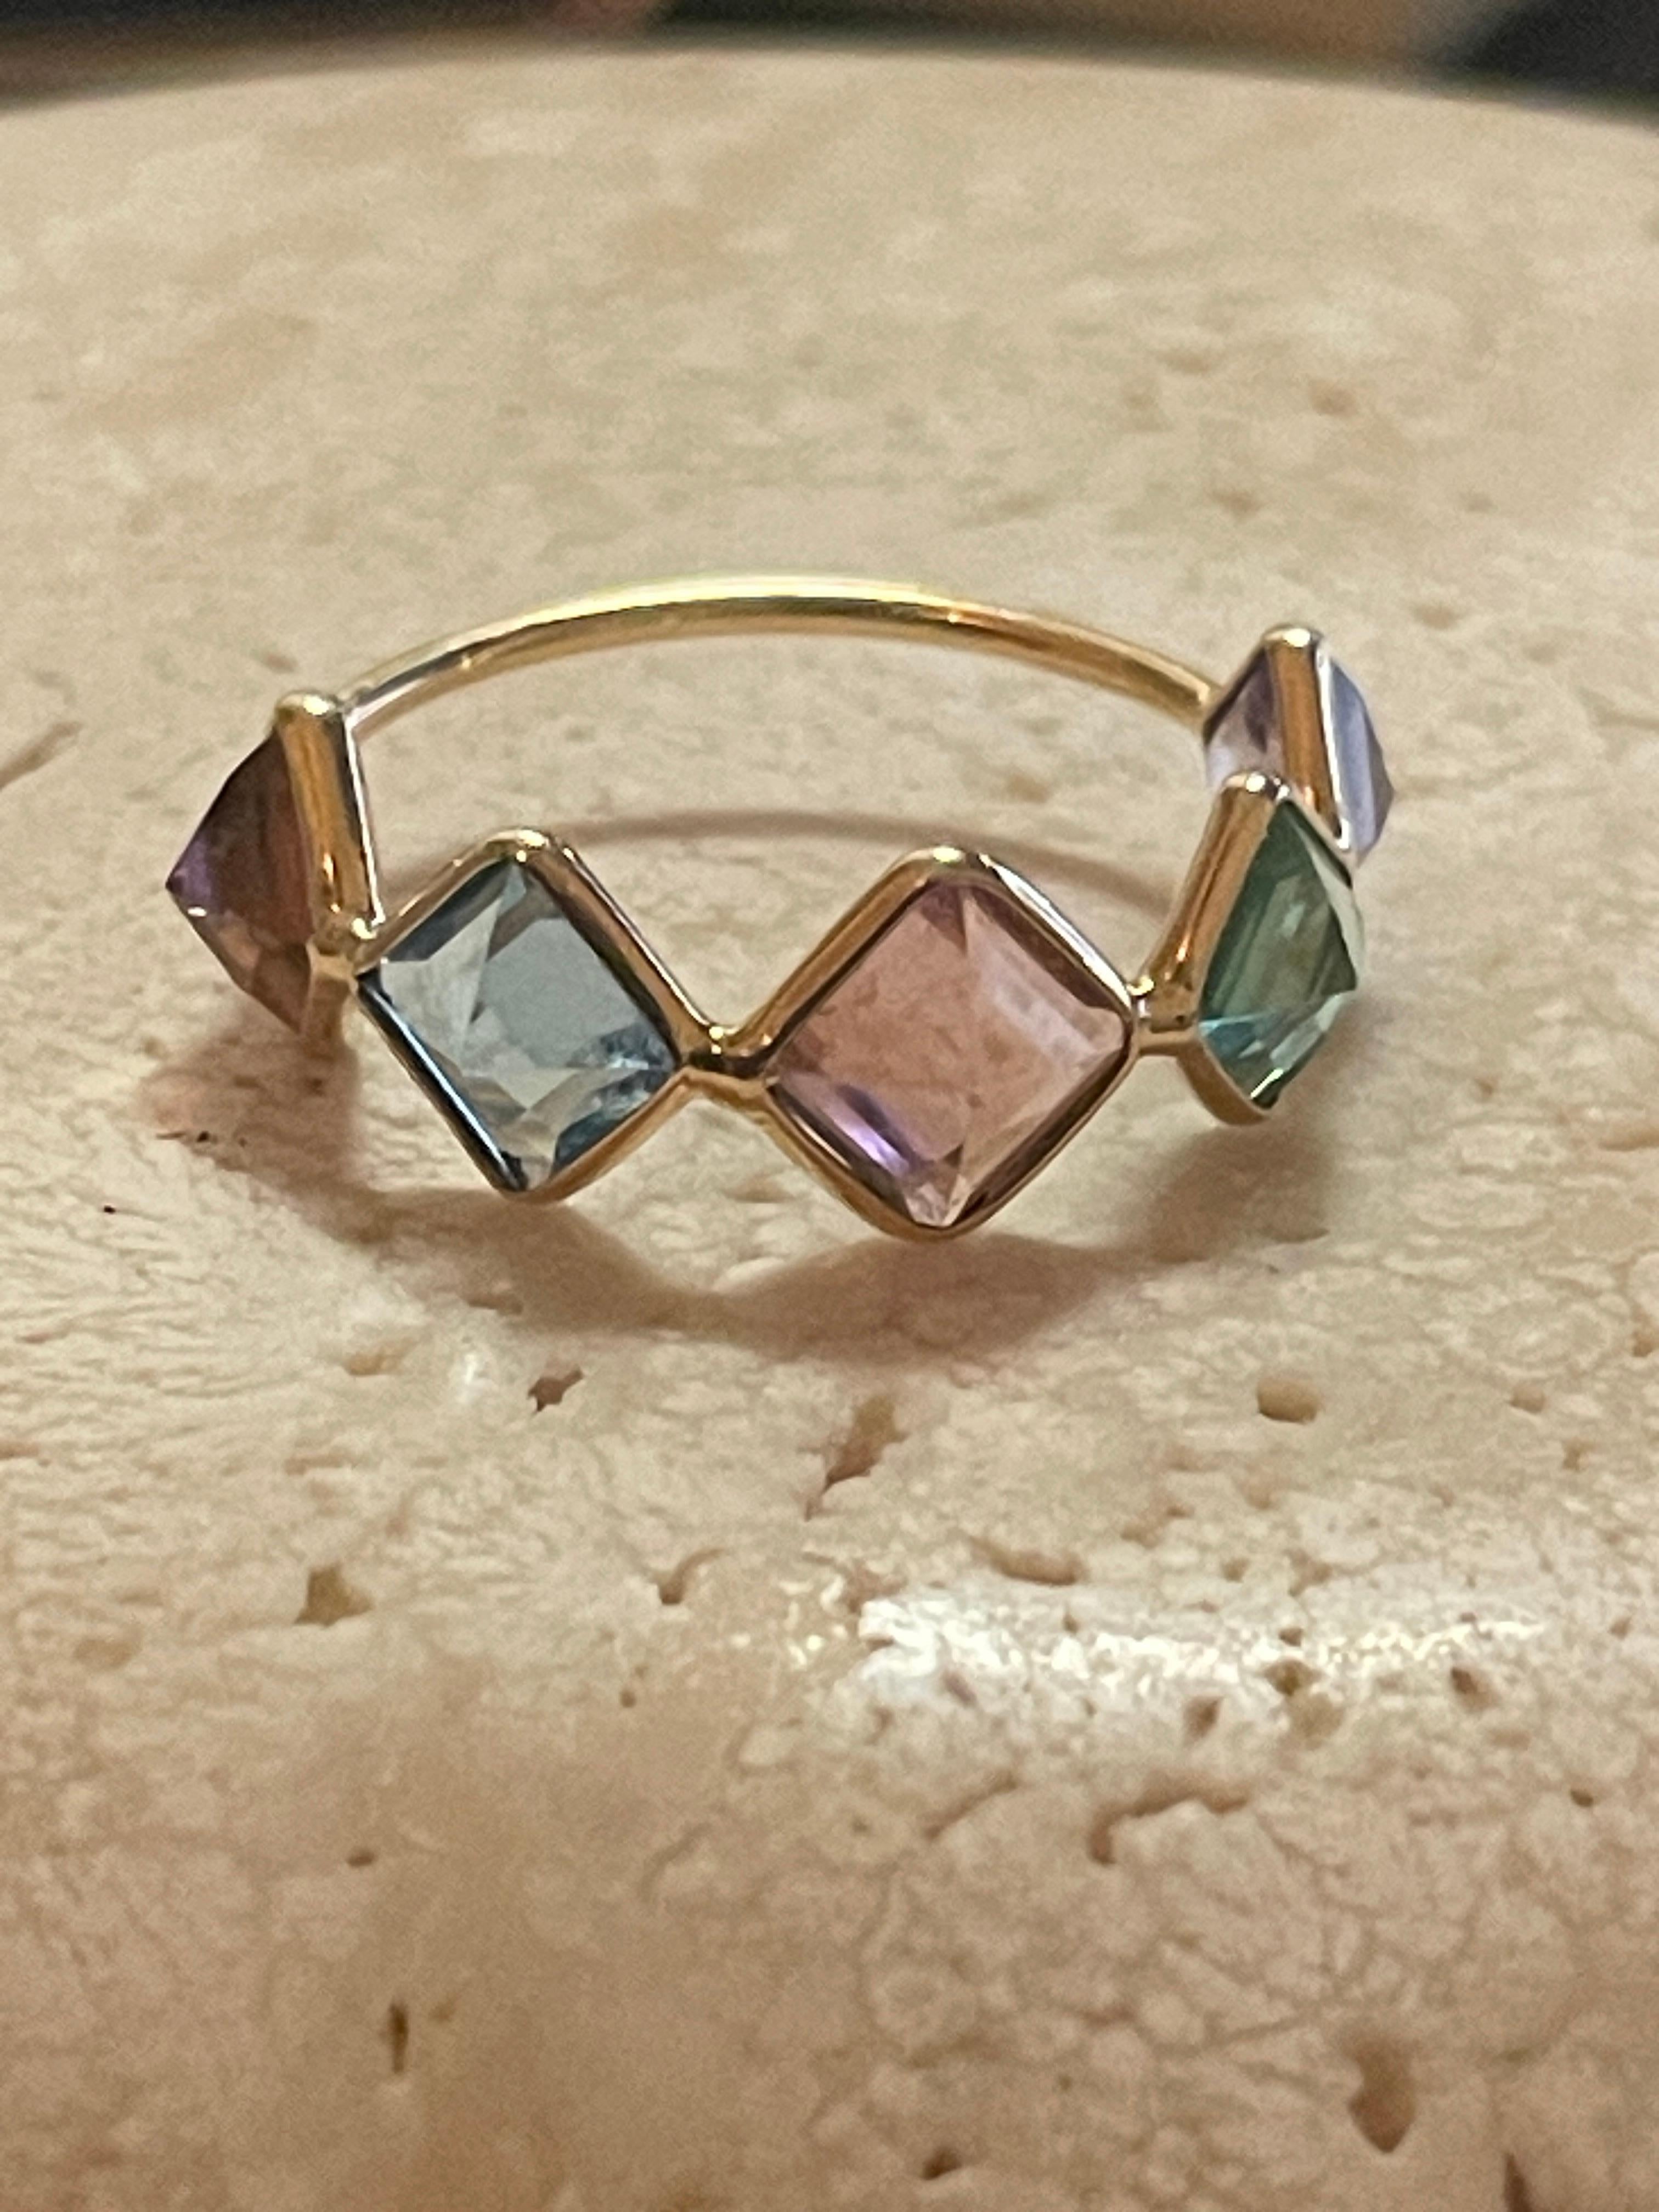 This beautiful 18K Gold ring is comprised of 5 emerald cut gemstones including Green Tourmaline, Pink Tourmaline, Watermelon Tourmaline, Amethyst & Aquamarine. Each gemstone is emerald cut and set upside down giving the top of the ring a peak for